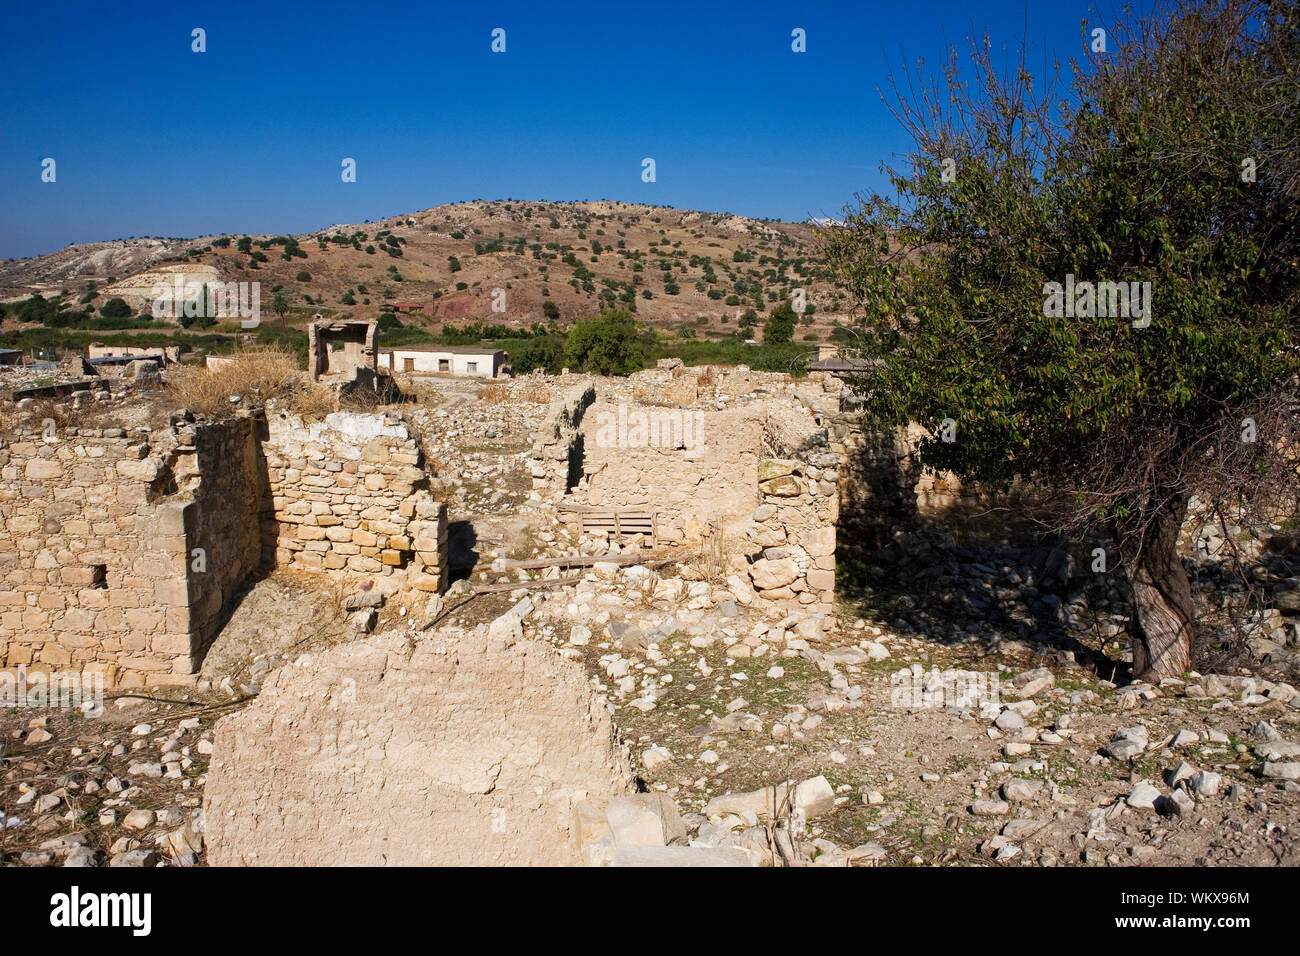 The abandoned village of Souskioú: ruined dwellings in an ex-Turkish enclave in Greek Cyprus Stock Photo